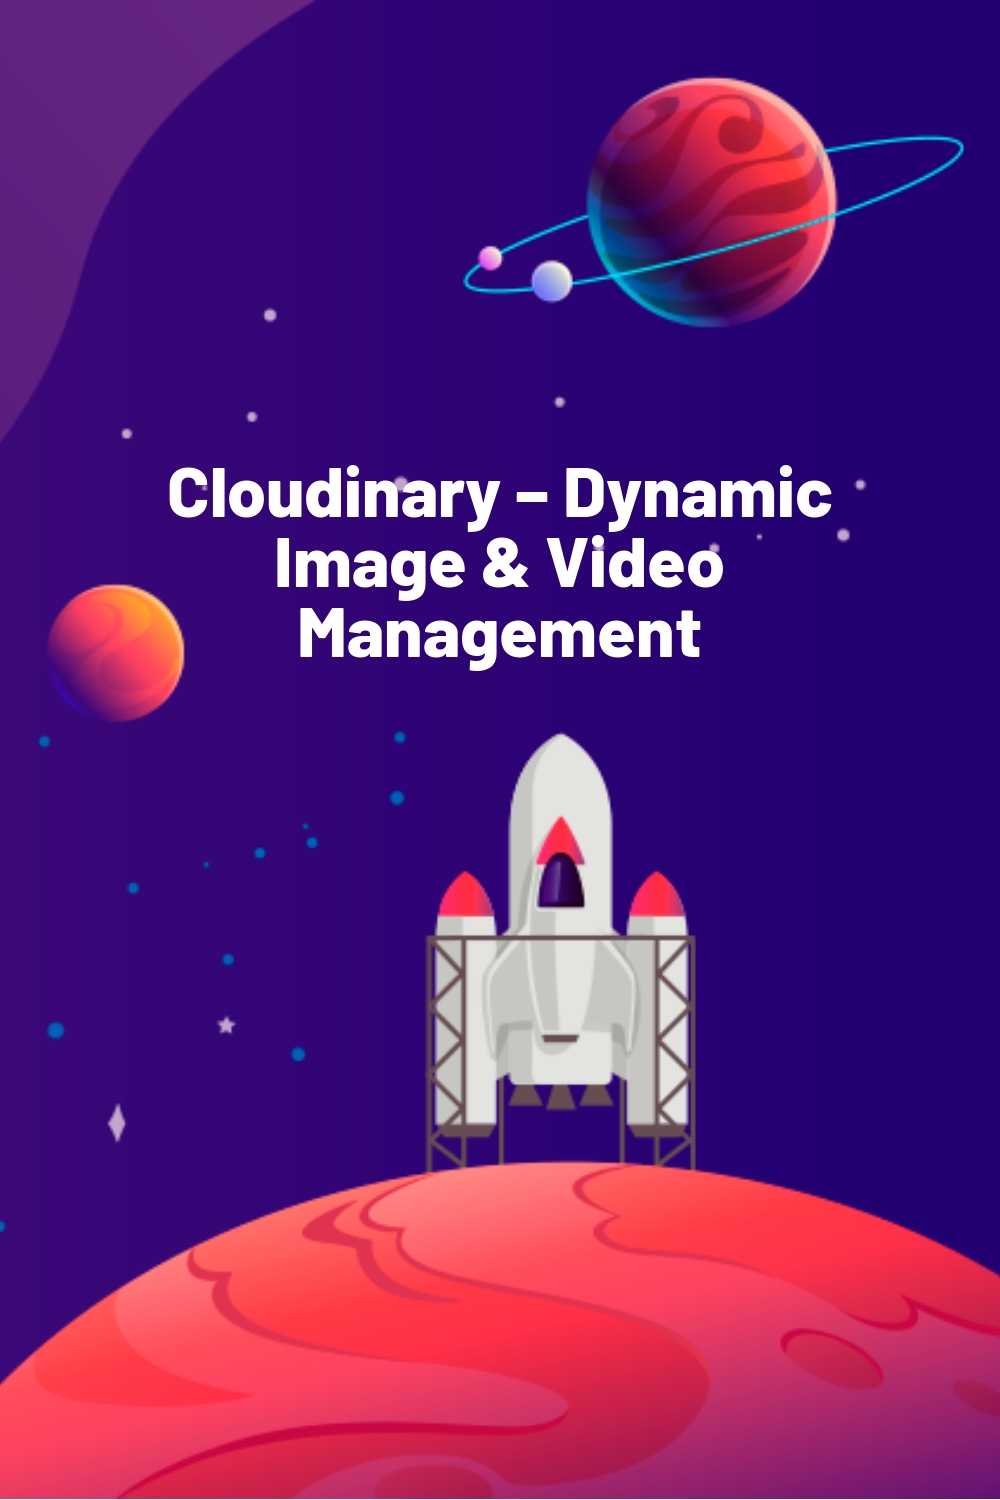 Cloudinary – Dynamic Image & Video Management